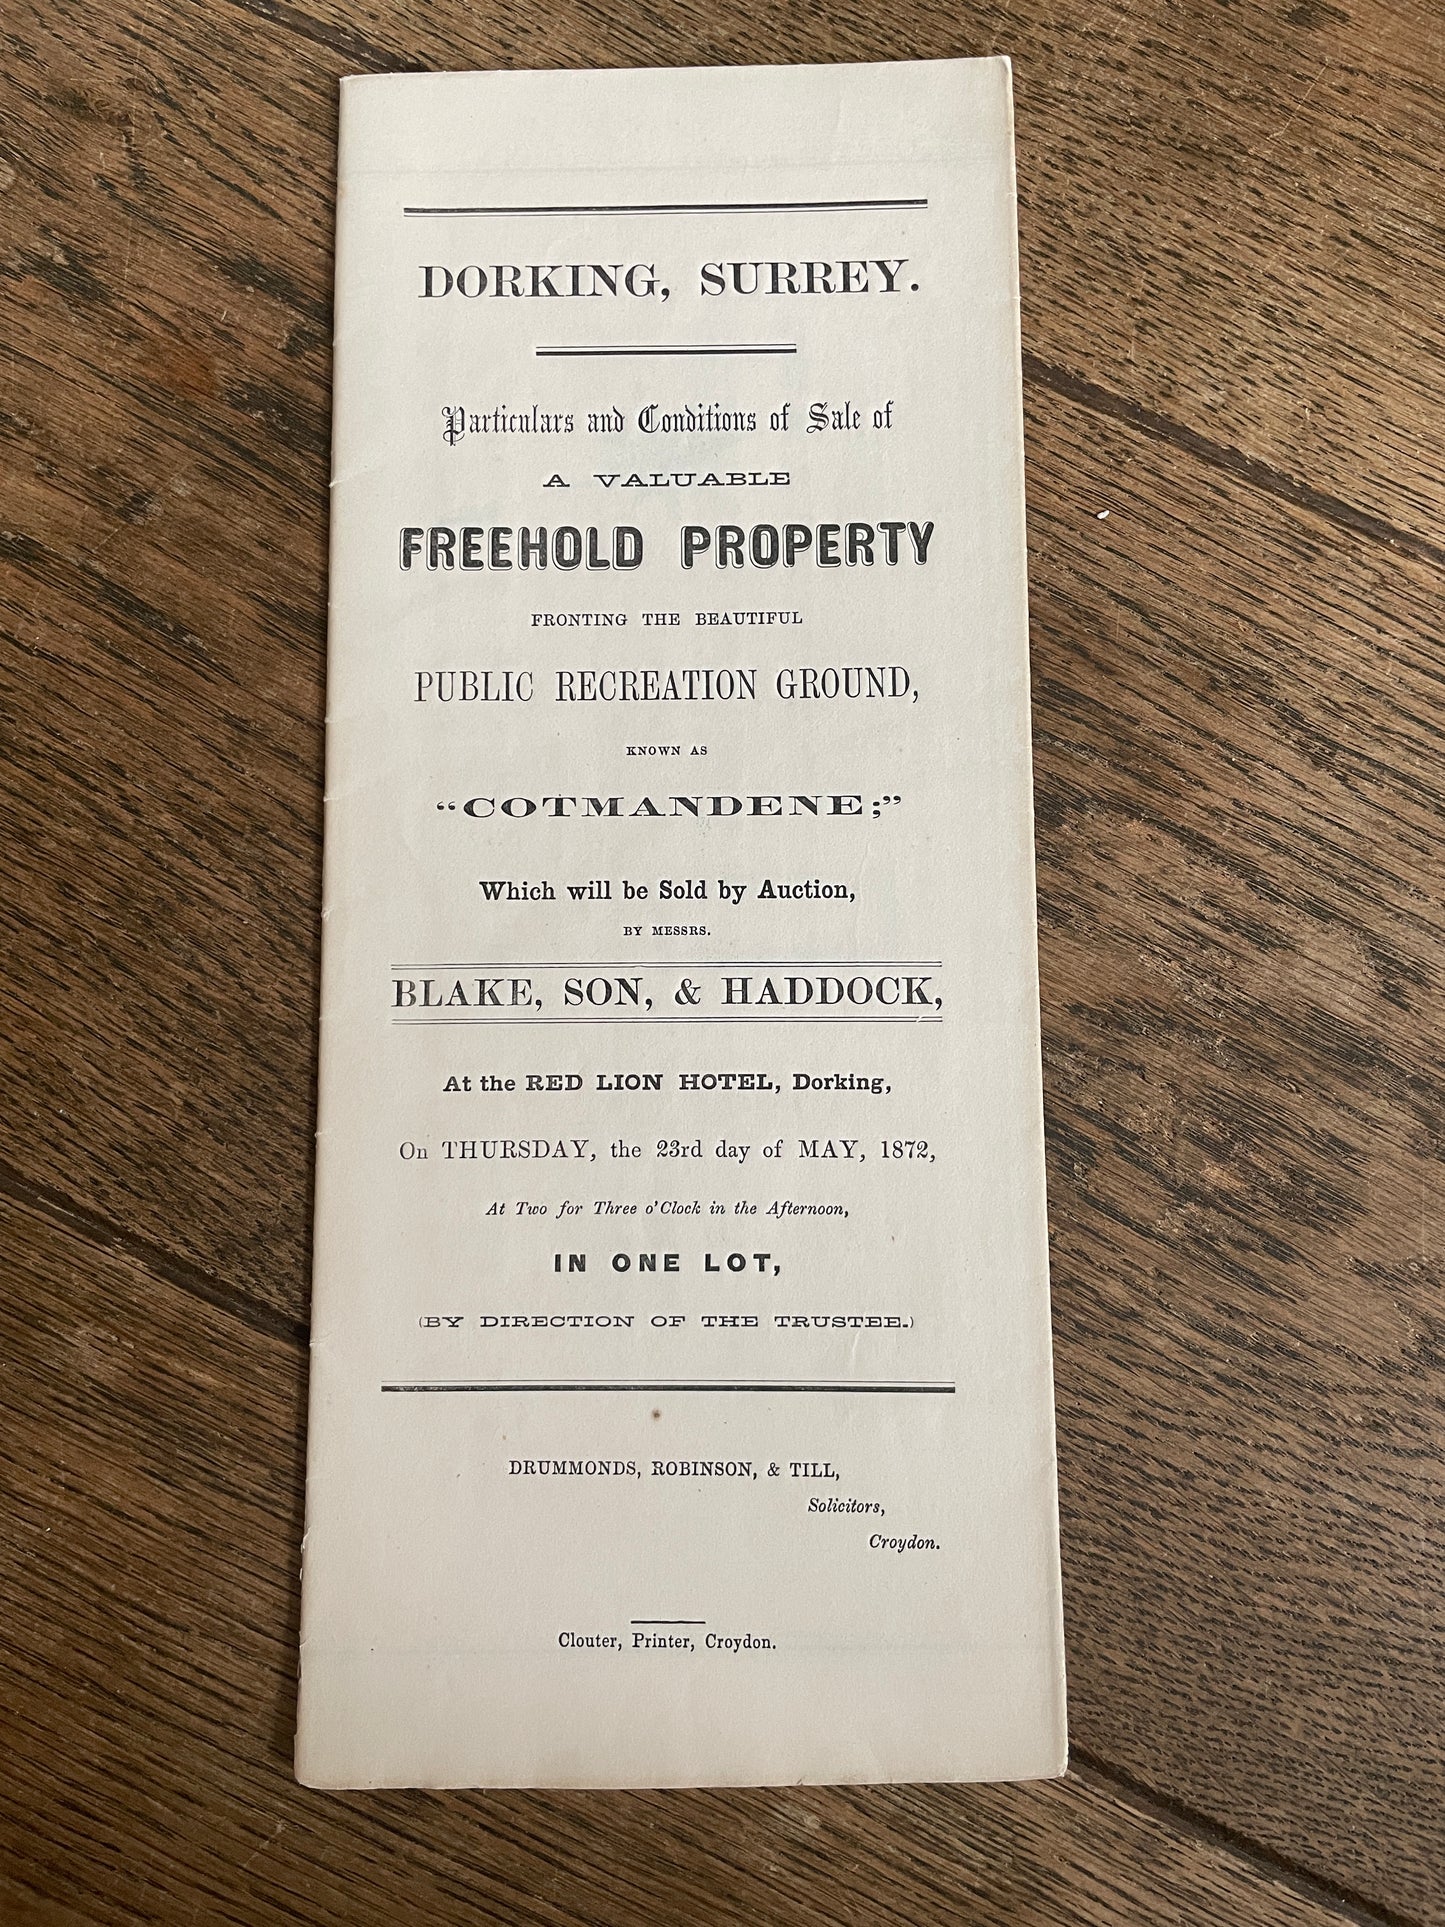 Two Freehold Properties on the Cotmandene, Dorking. 1872 Sales Particulars